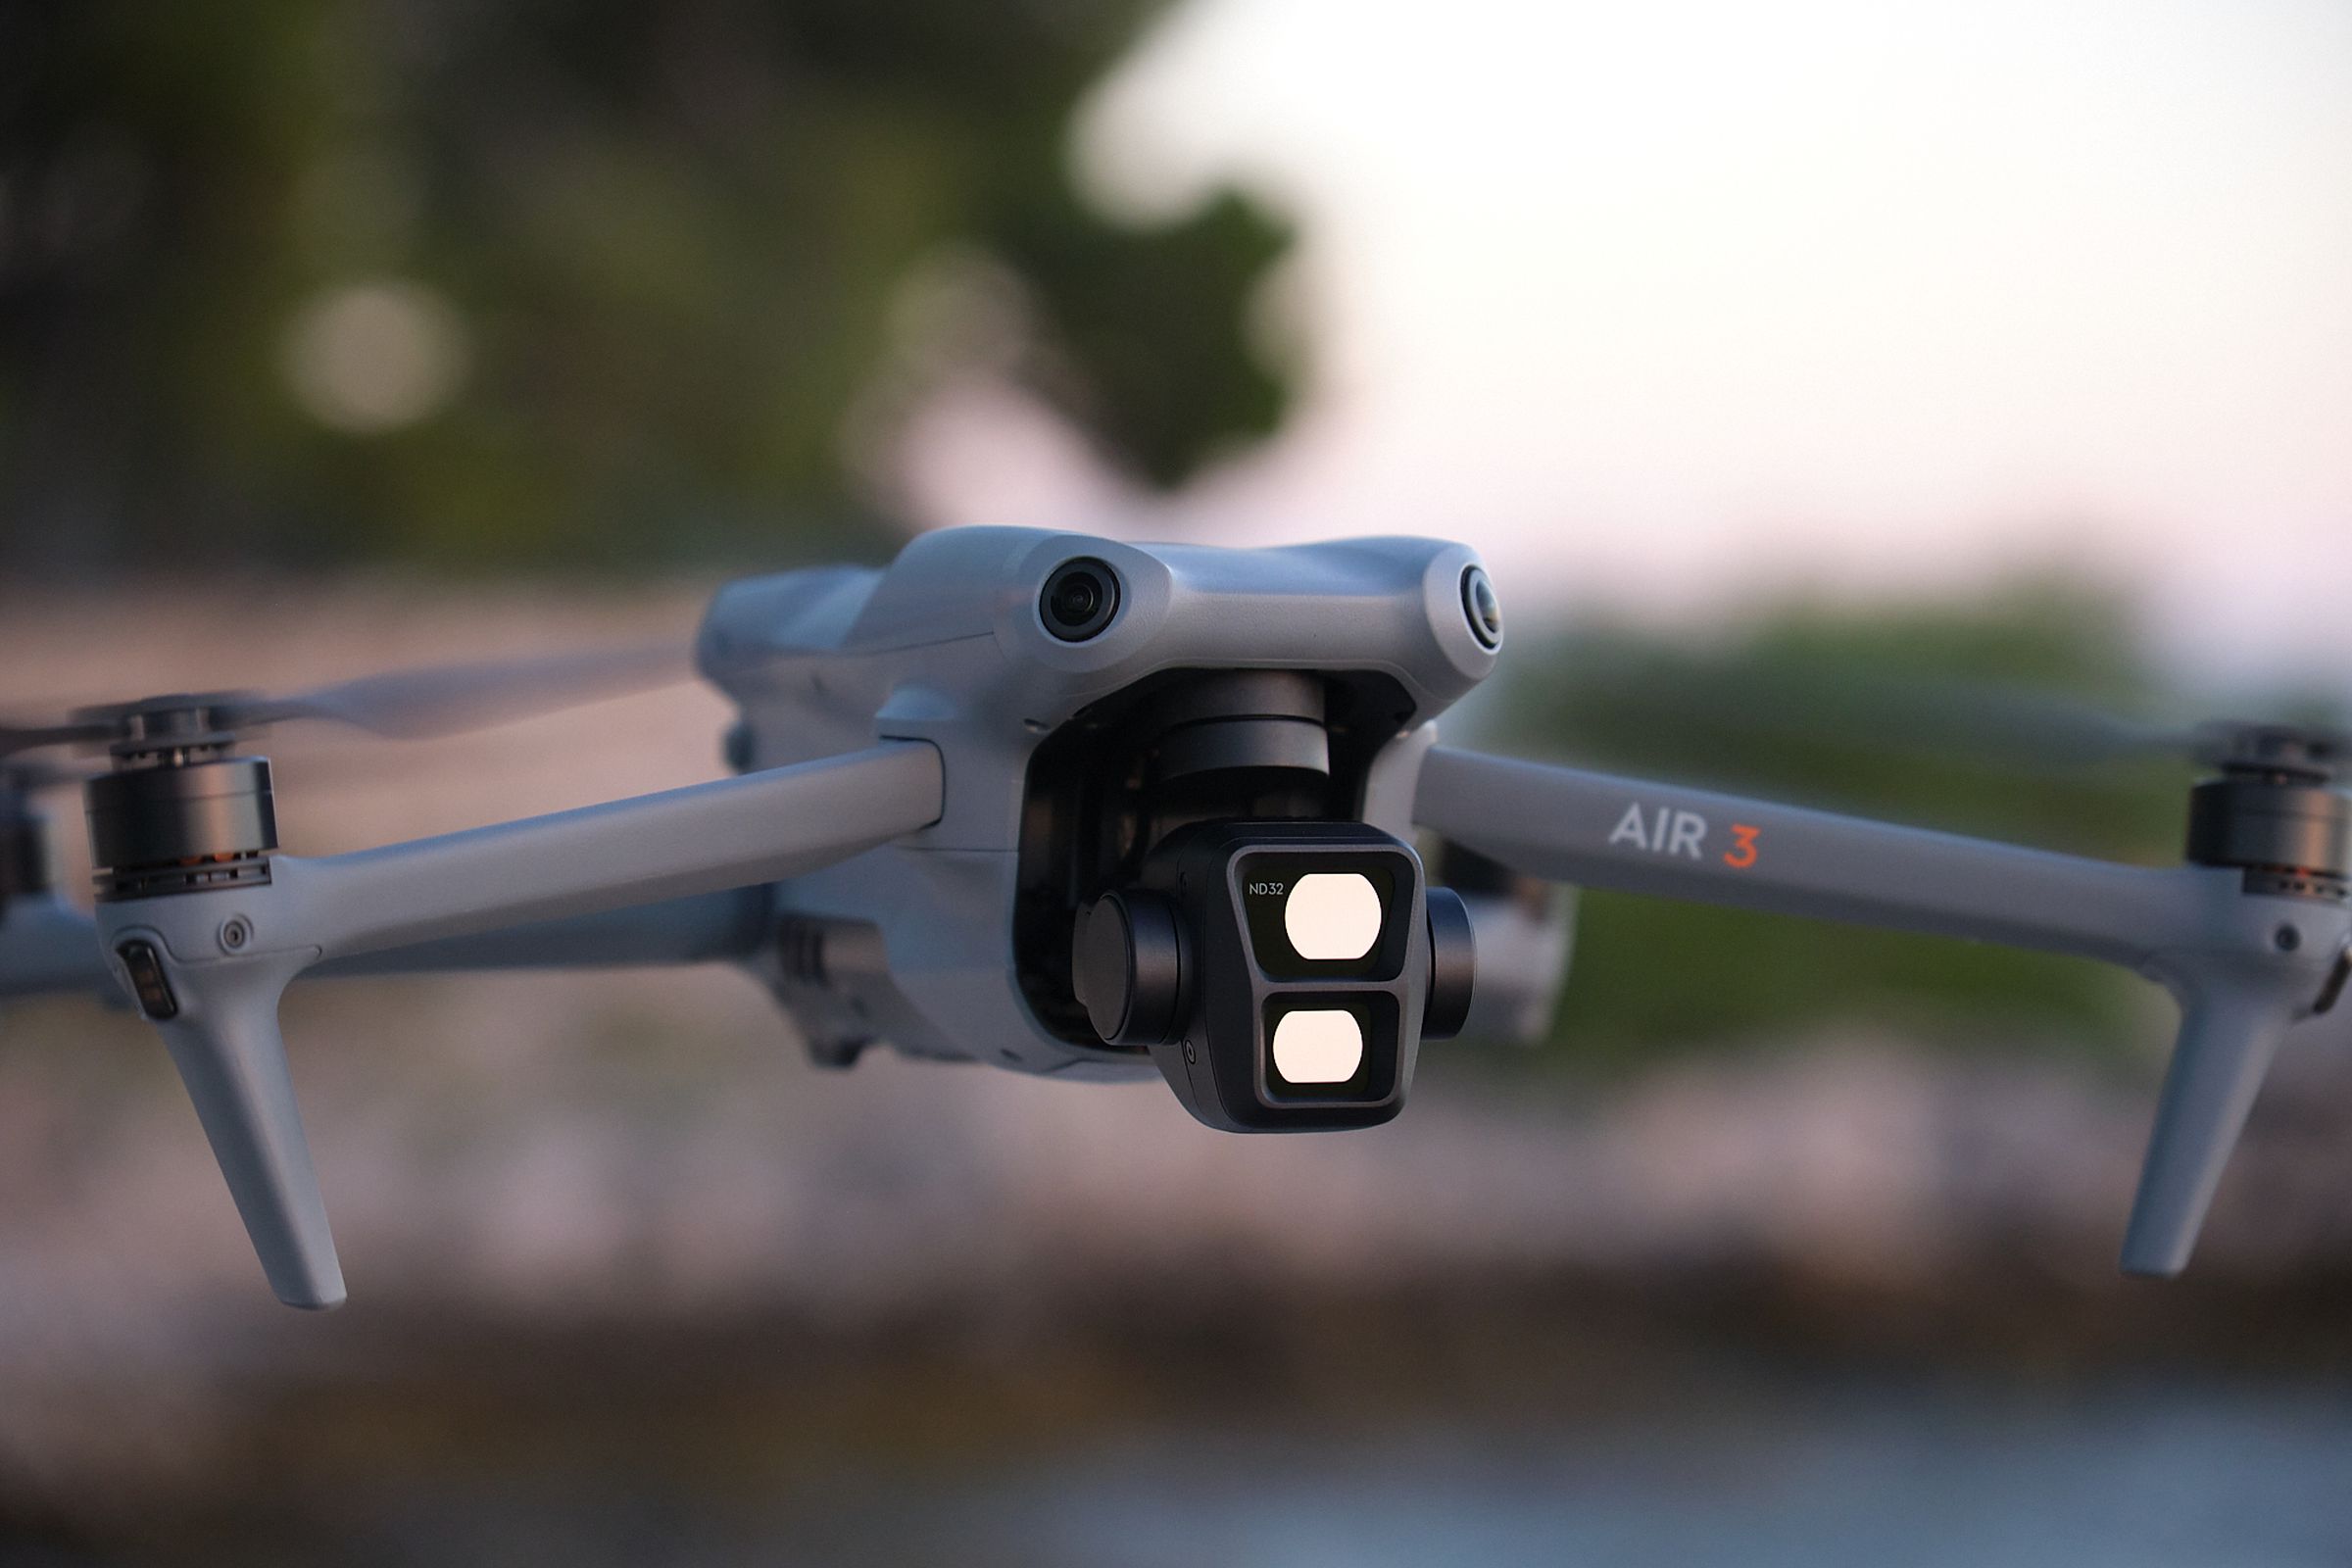 The Air 3 is eligible for Europe’s C1 drone classification.